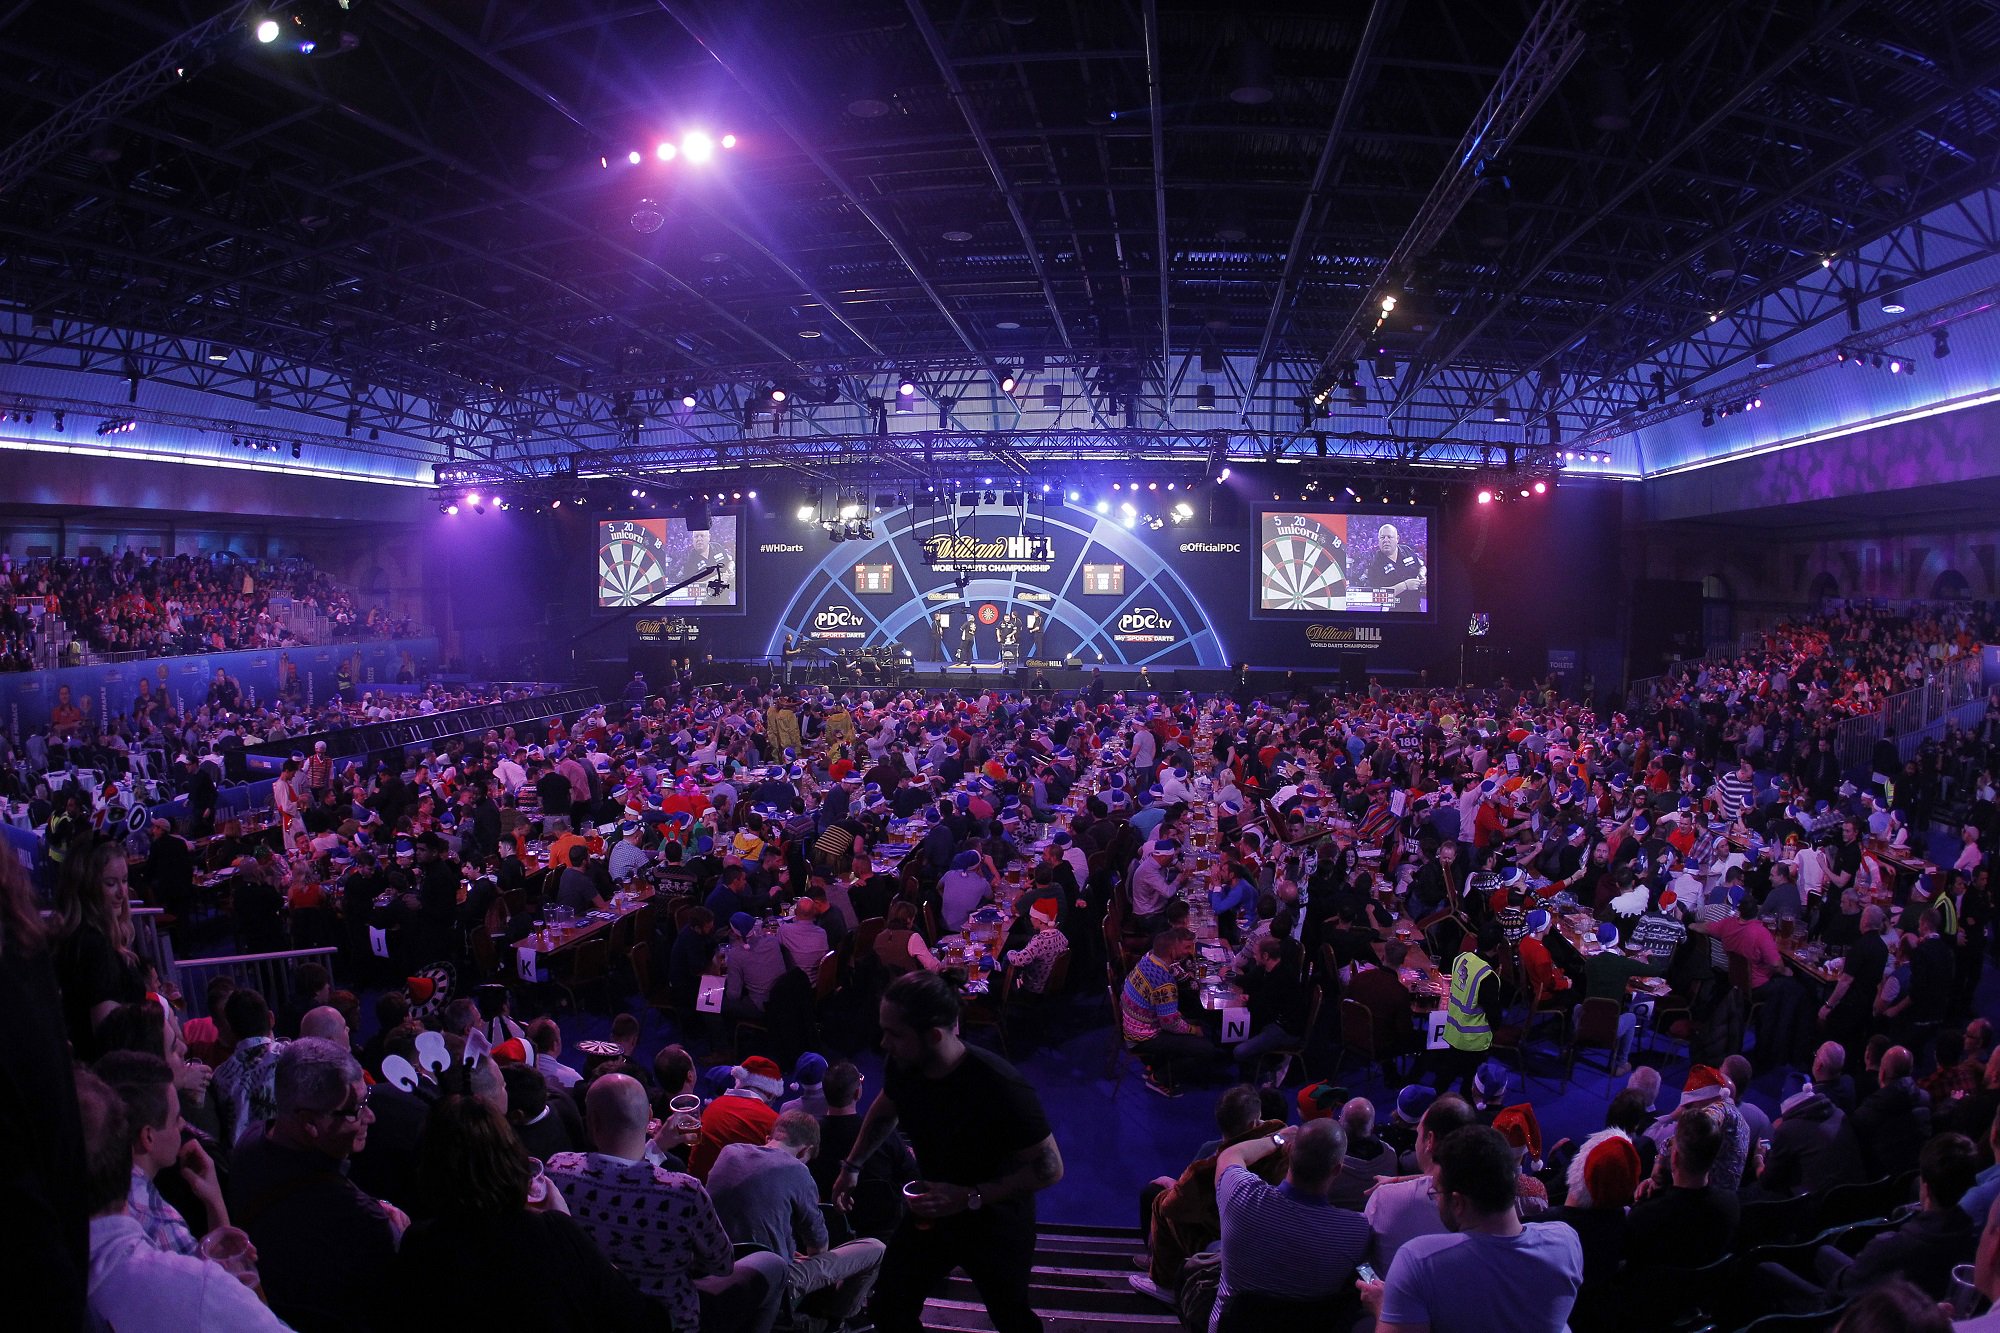 killing Express jul PDC Darts on Twitter: "TICKETS | General Sale of standard @WilliamHill World  Championship tickets at 10am: Buy https://t.co/LvvqUU9uH5 Info  https://t.co/Wles3bHeRi https://t.co/axd4uoVmTa" / Twitter